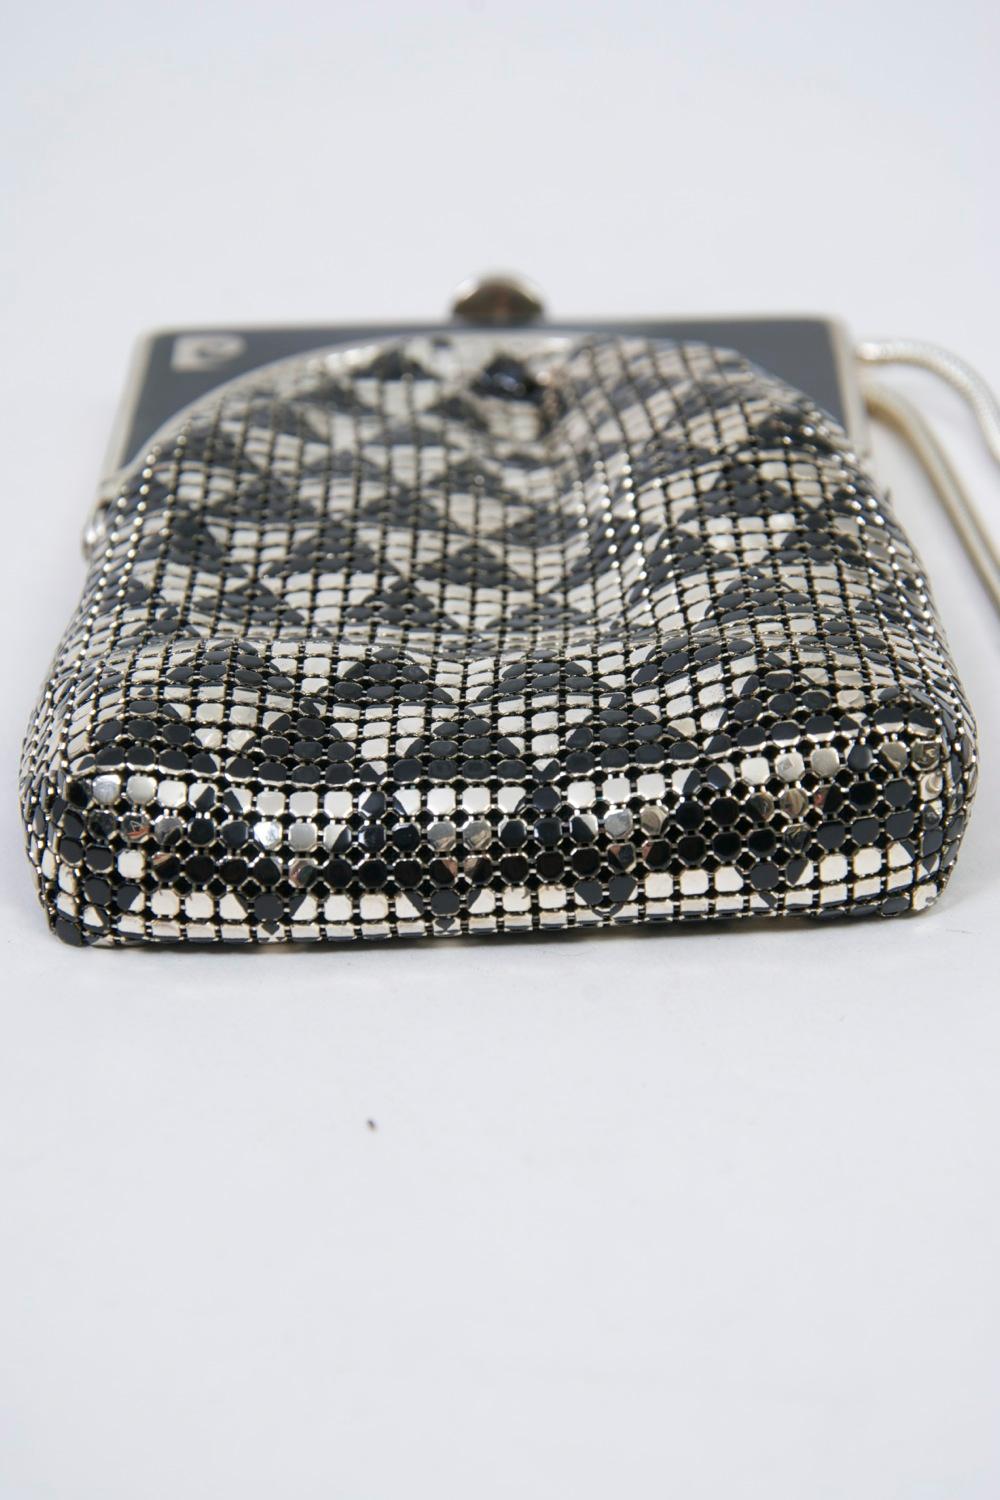 Pierre Cardin Silver and Black Mesh Evening Bag 3